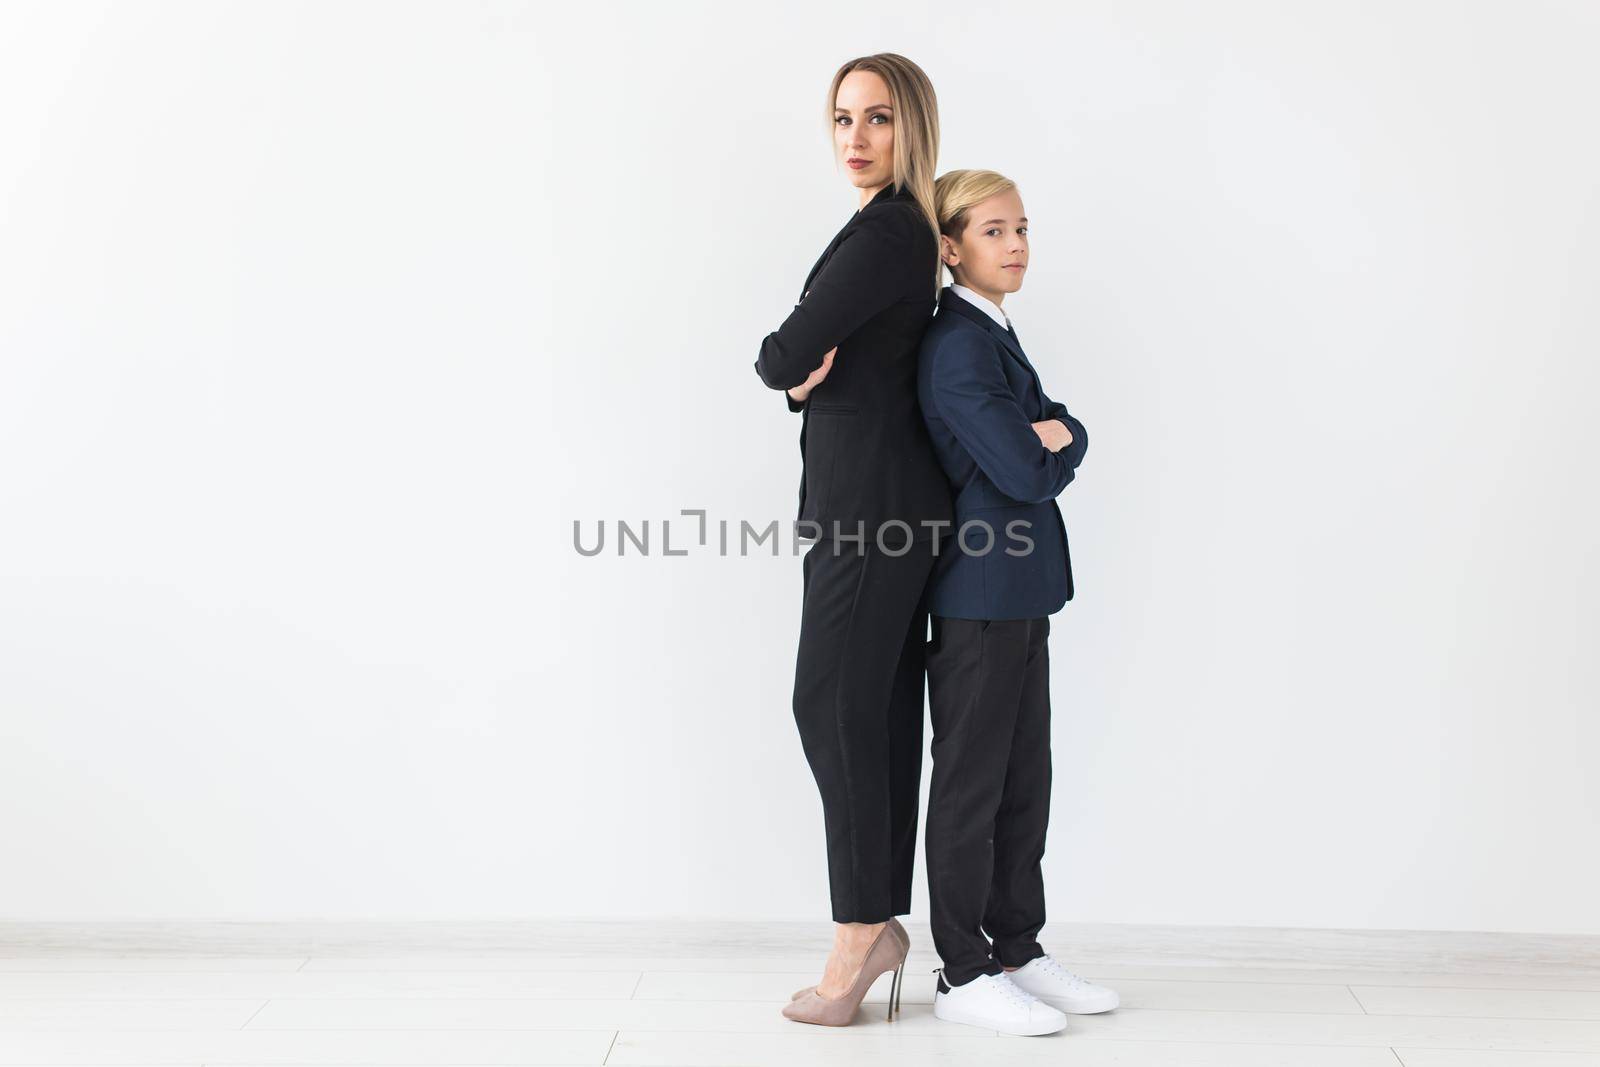 Teenager and single parent - Young mother and son standing together, back to back on white background with copyspace.